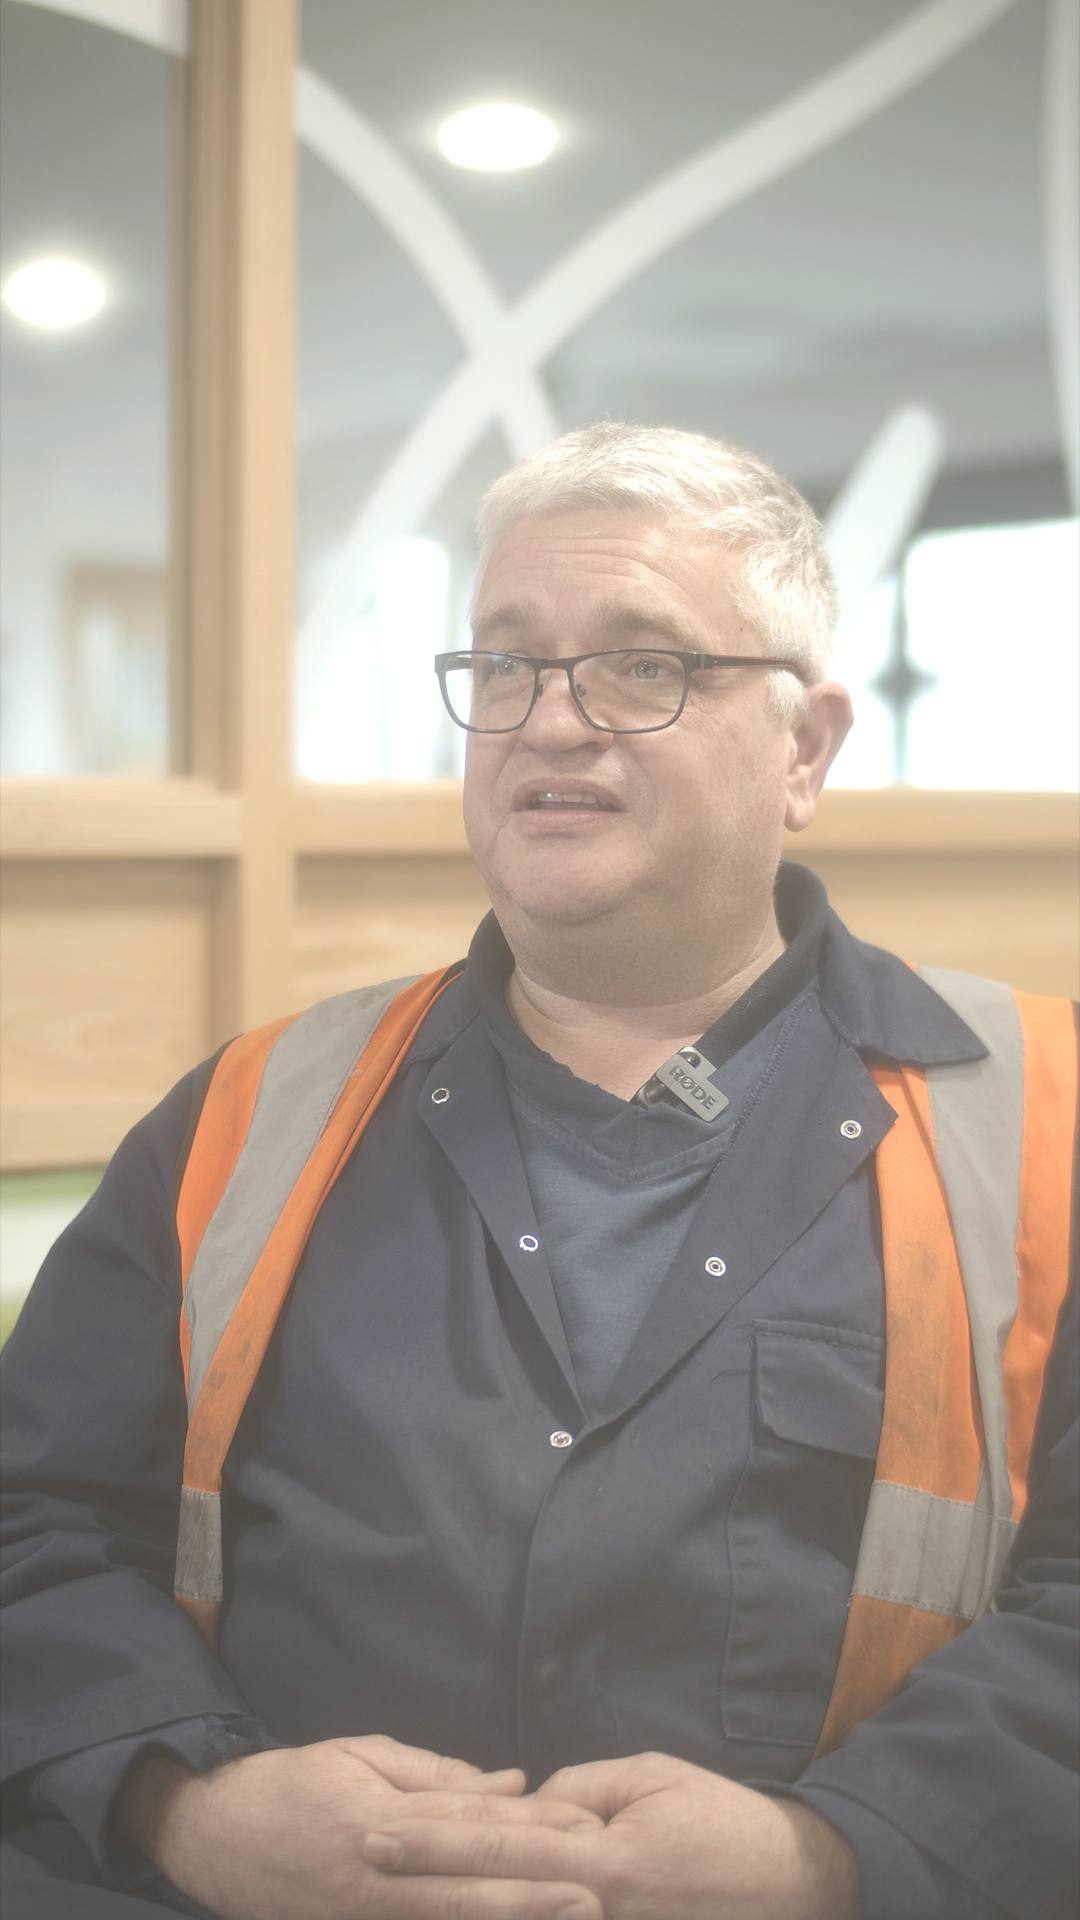 Meet an Engineering Manager video blurred